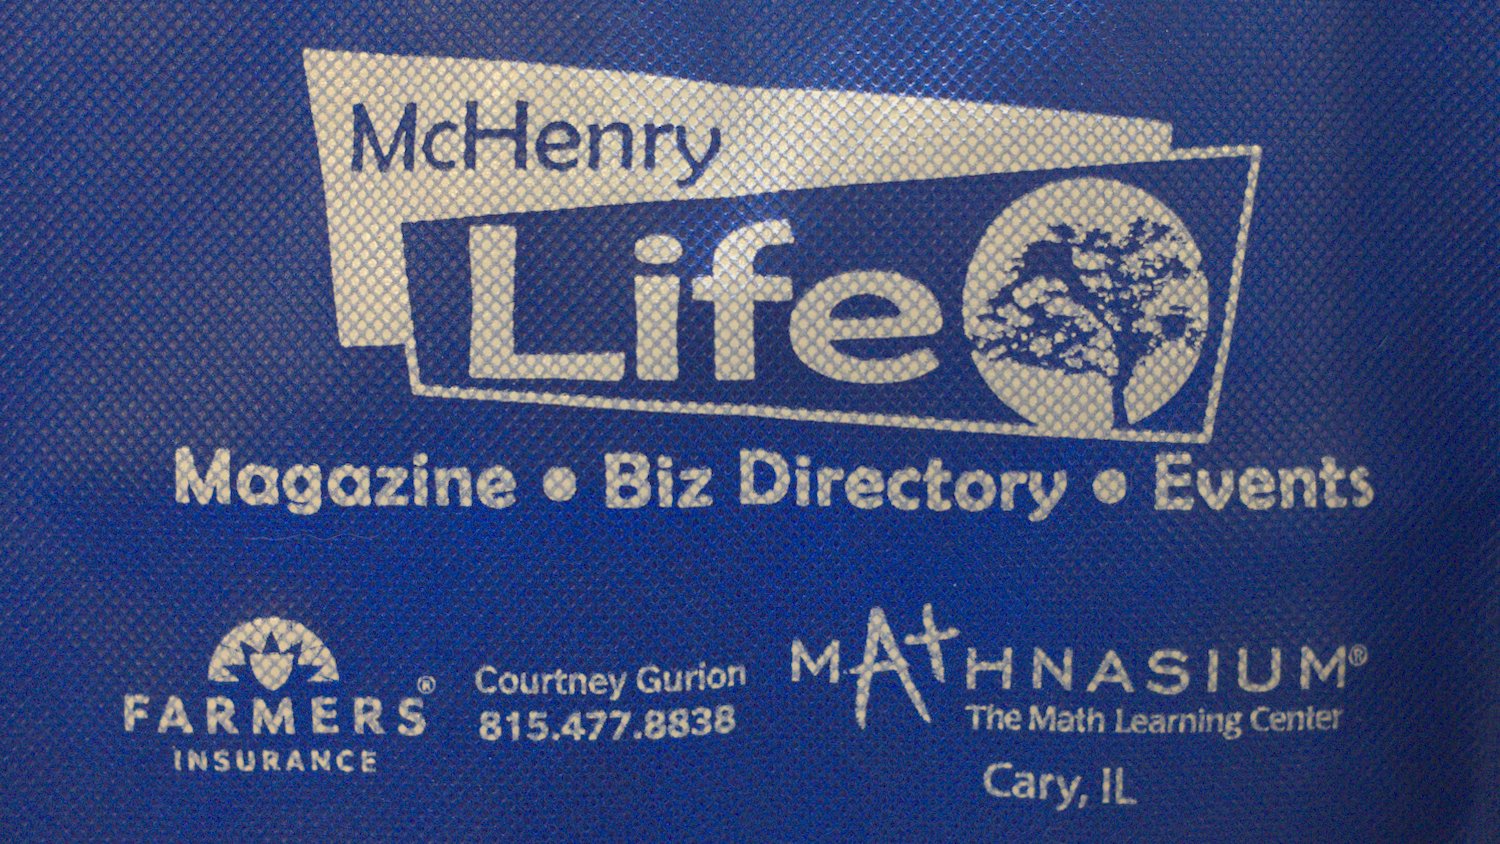 McHenry Life logo on the chamber bags.